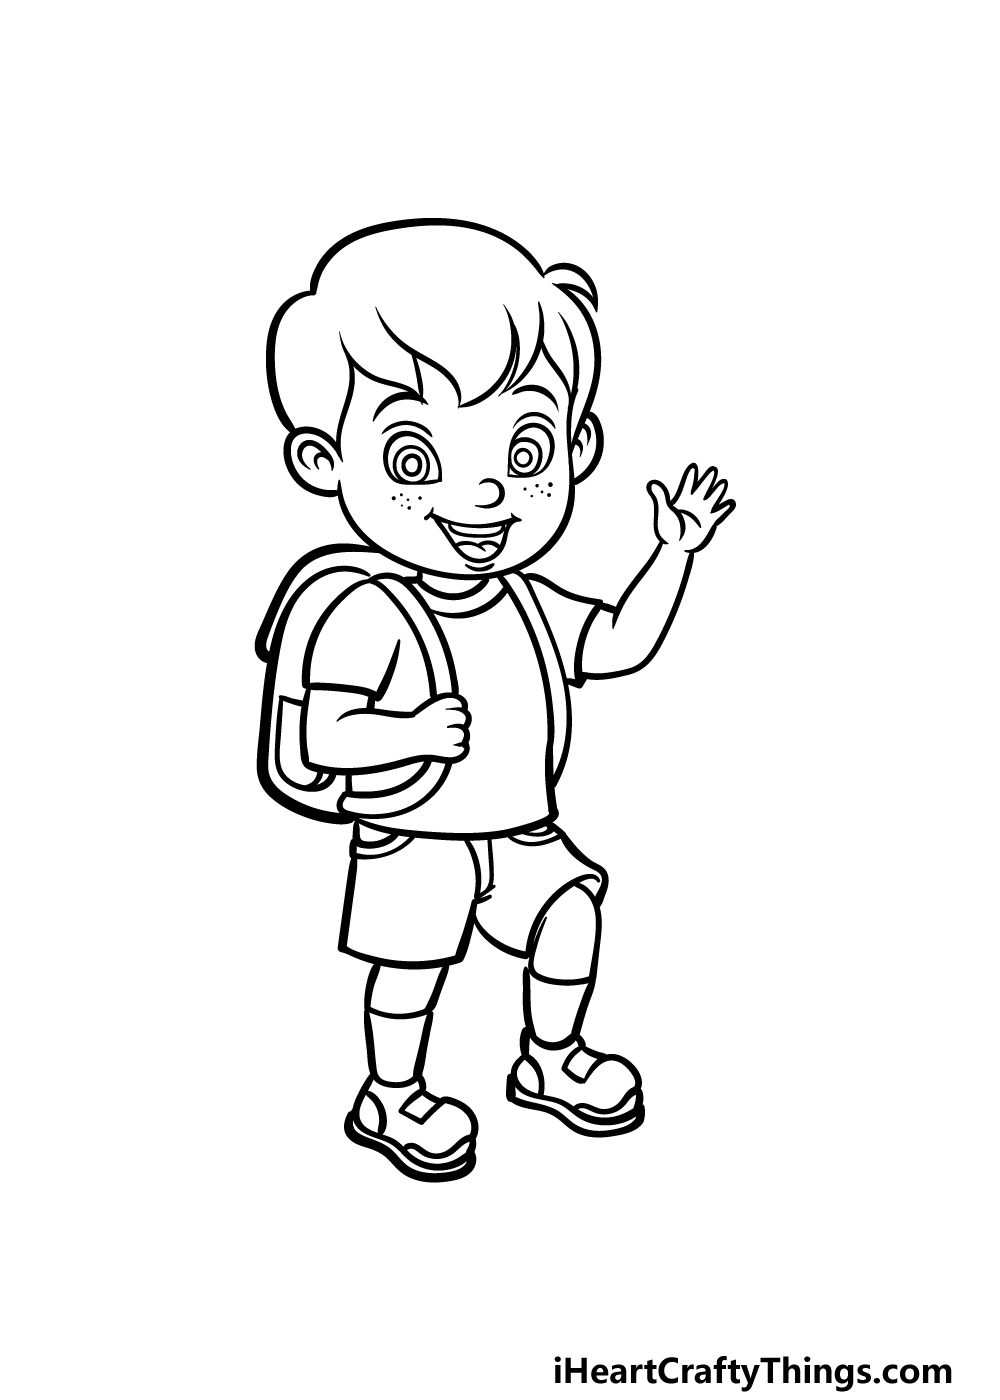 Hand Drawing Of A Stylish Boy In Sketch Style. Vector Illustration.  Royalty-Free Stock Image - Storyblocks